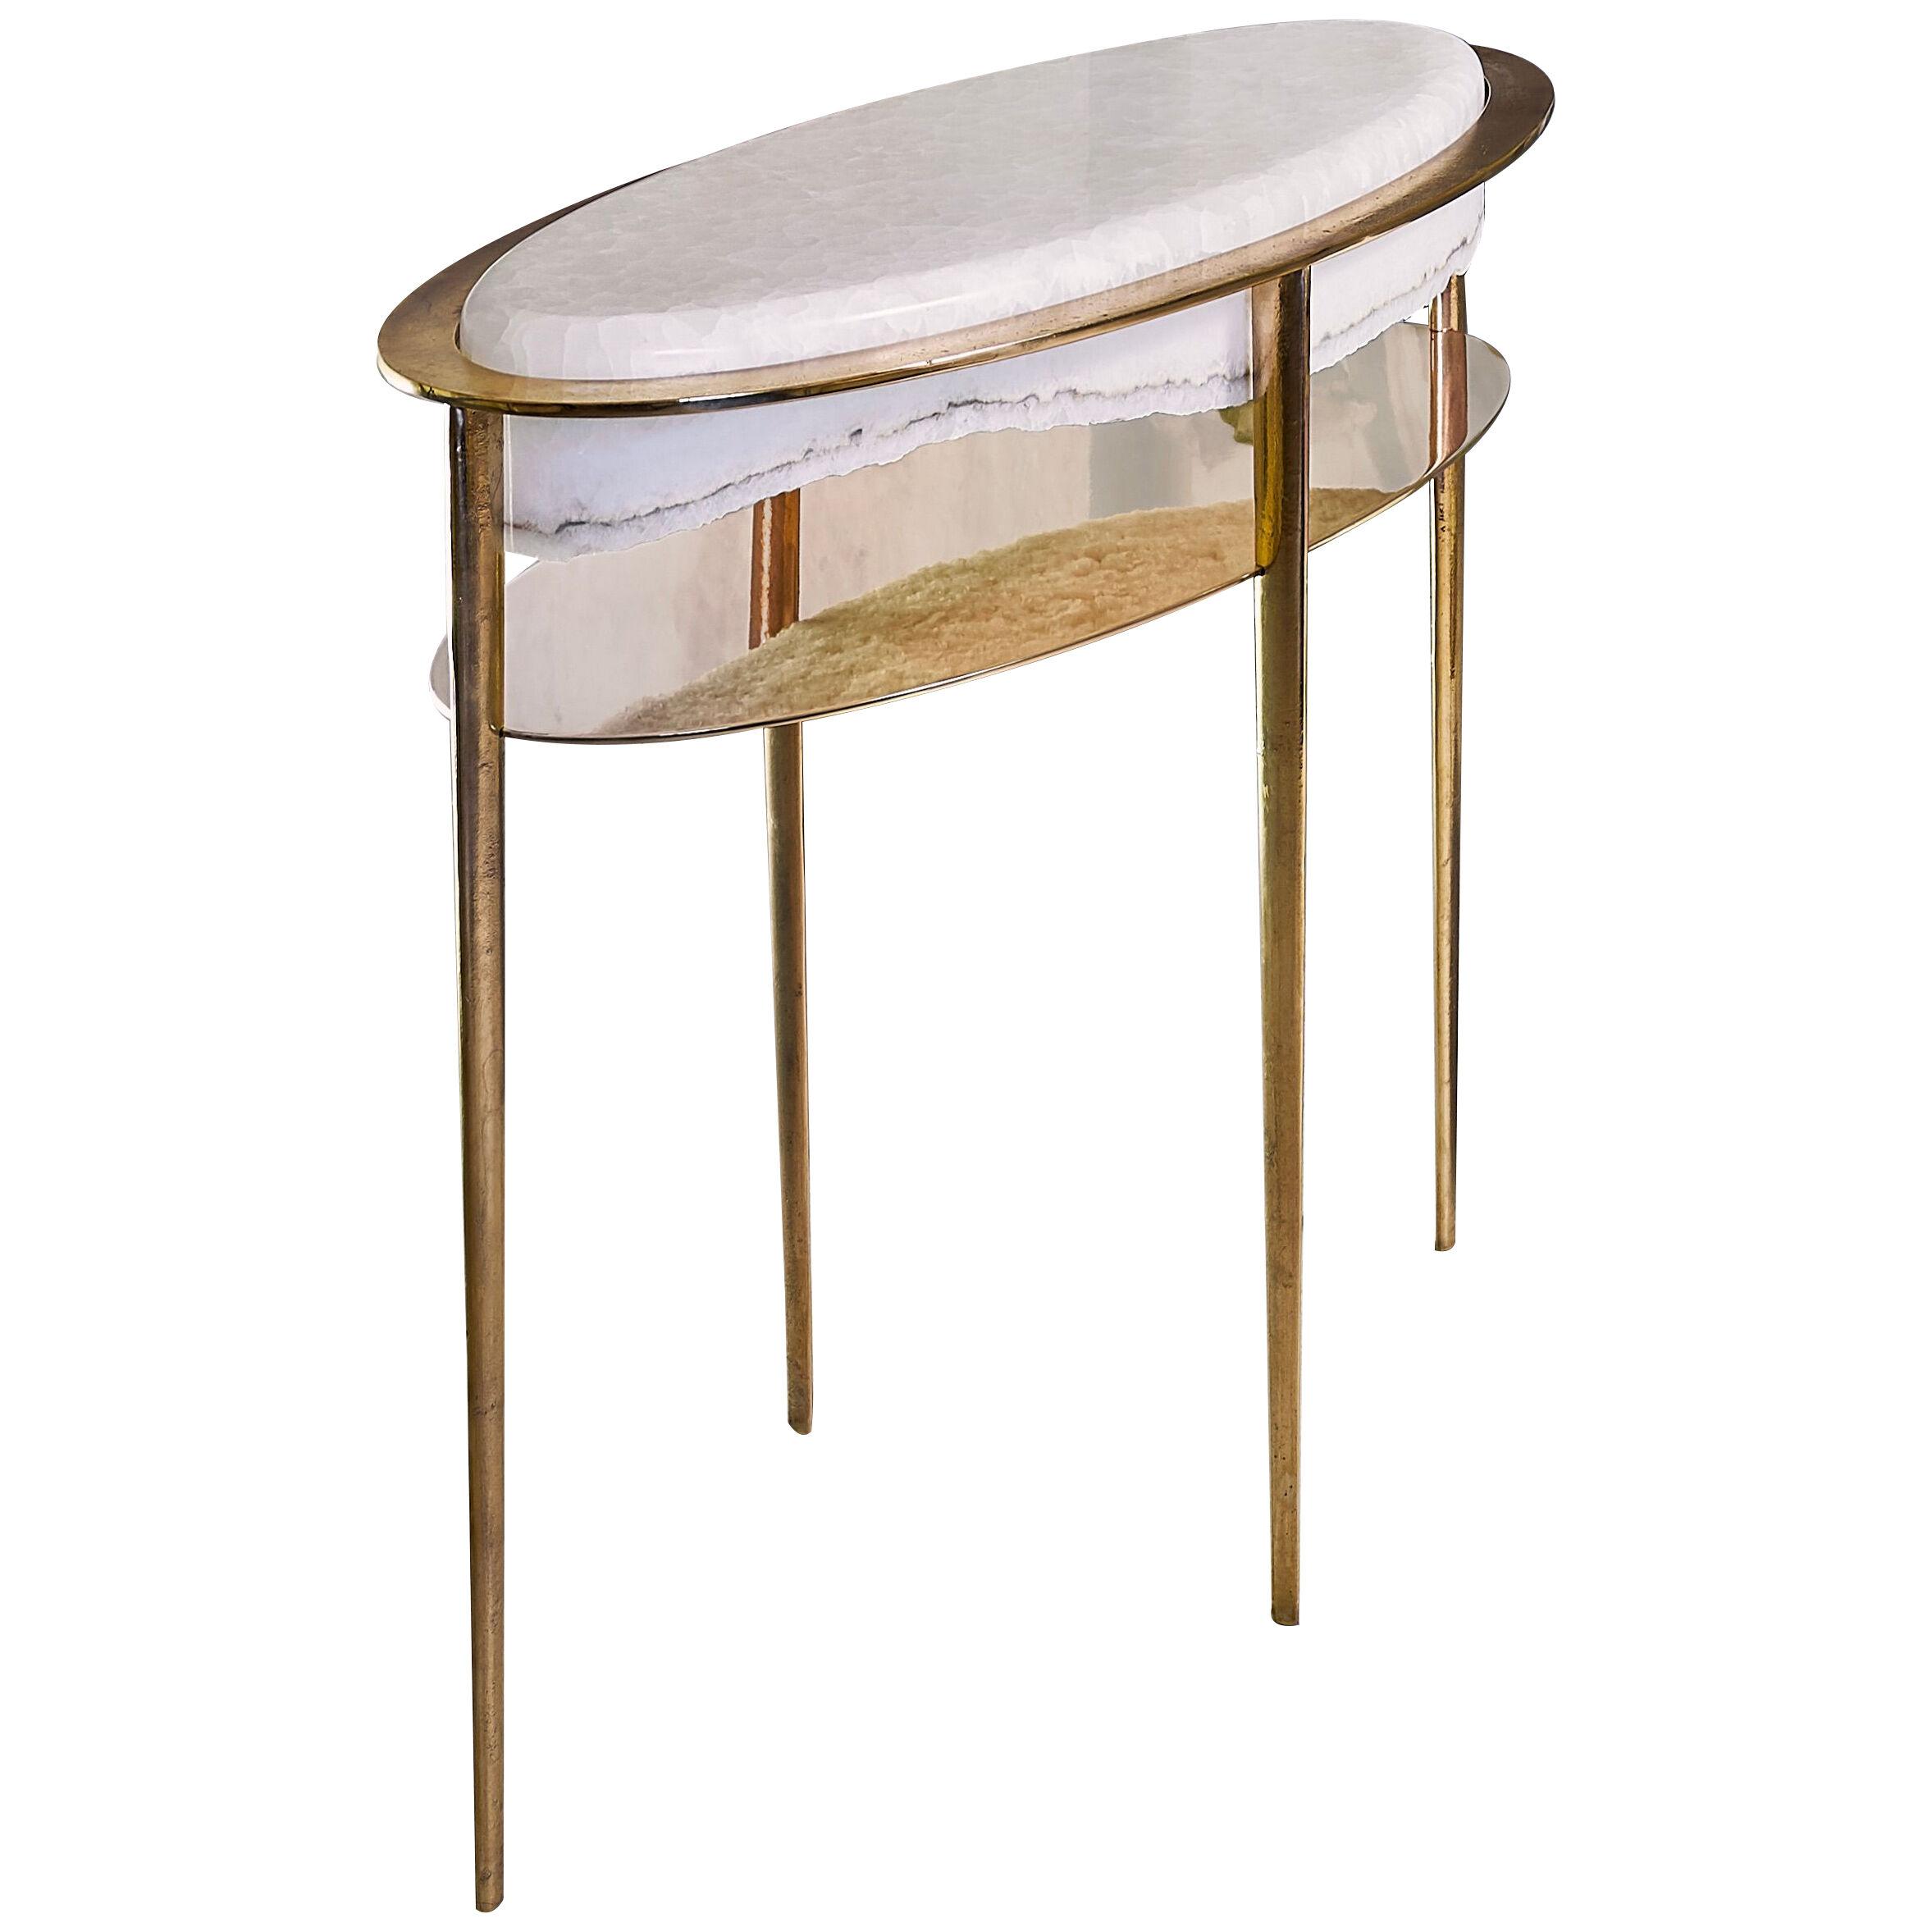 Sculptural Console Oval Cremino by Gianluca Pacchioni White Onyx Top